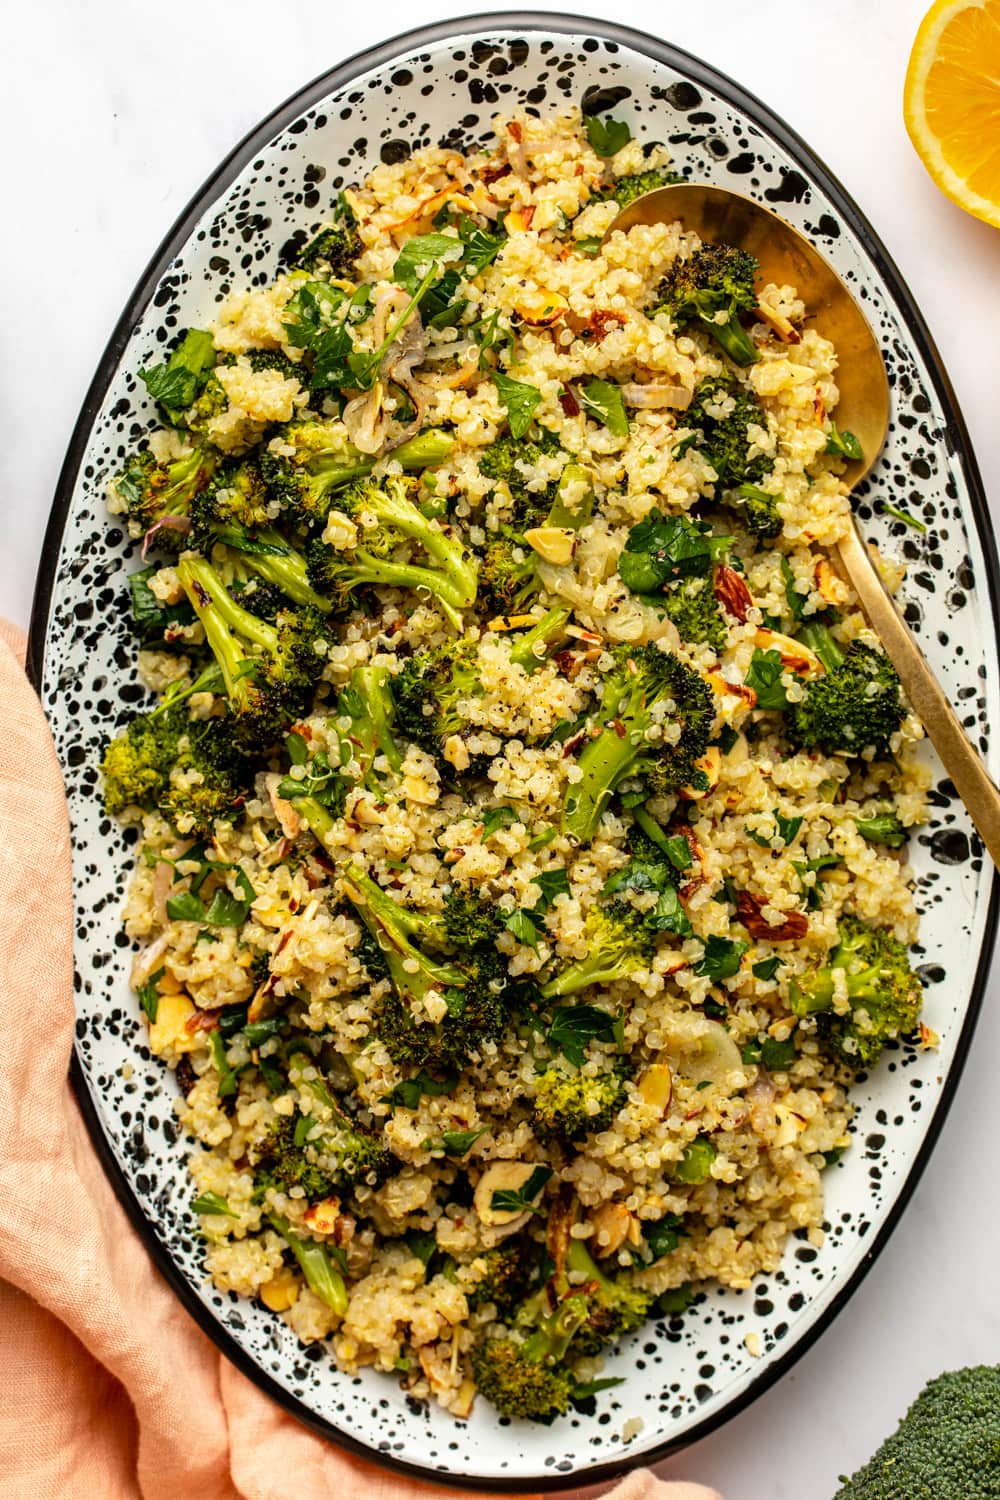 roasted broccoli quinoa salad served on a large oval plate with a serving spoon digged in